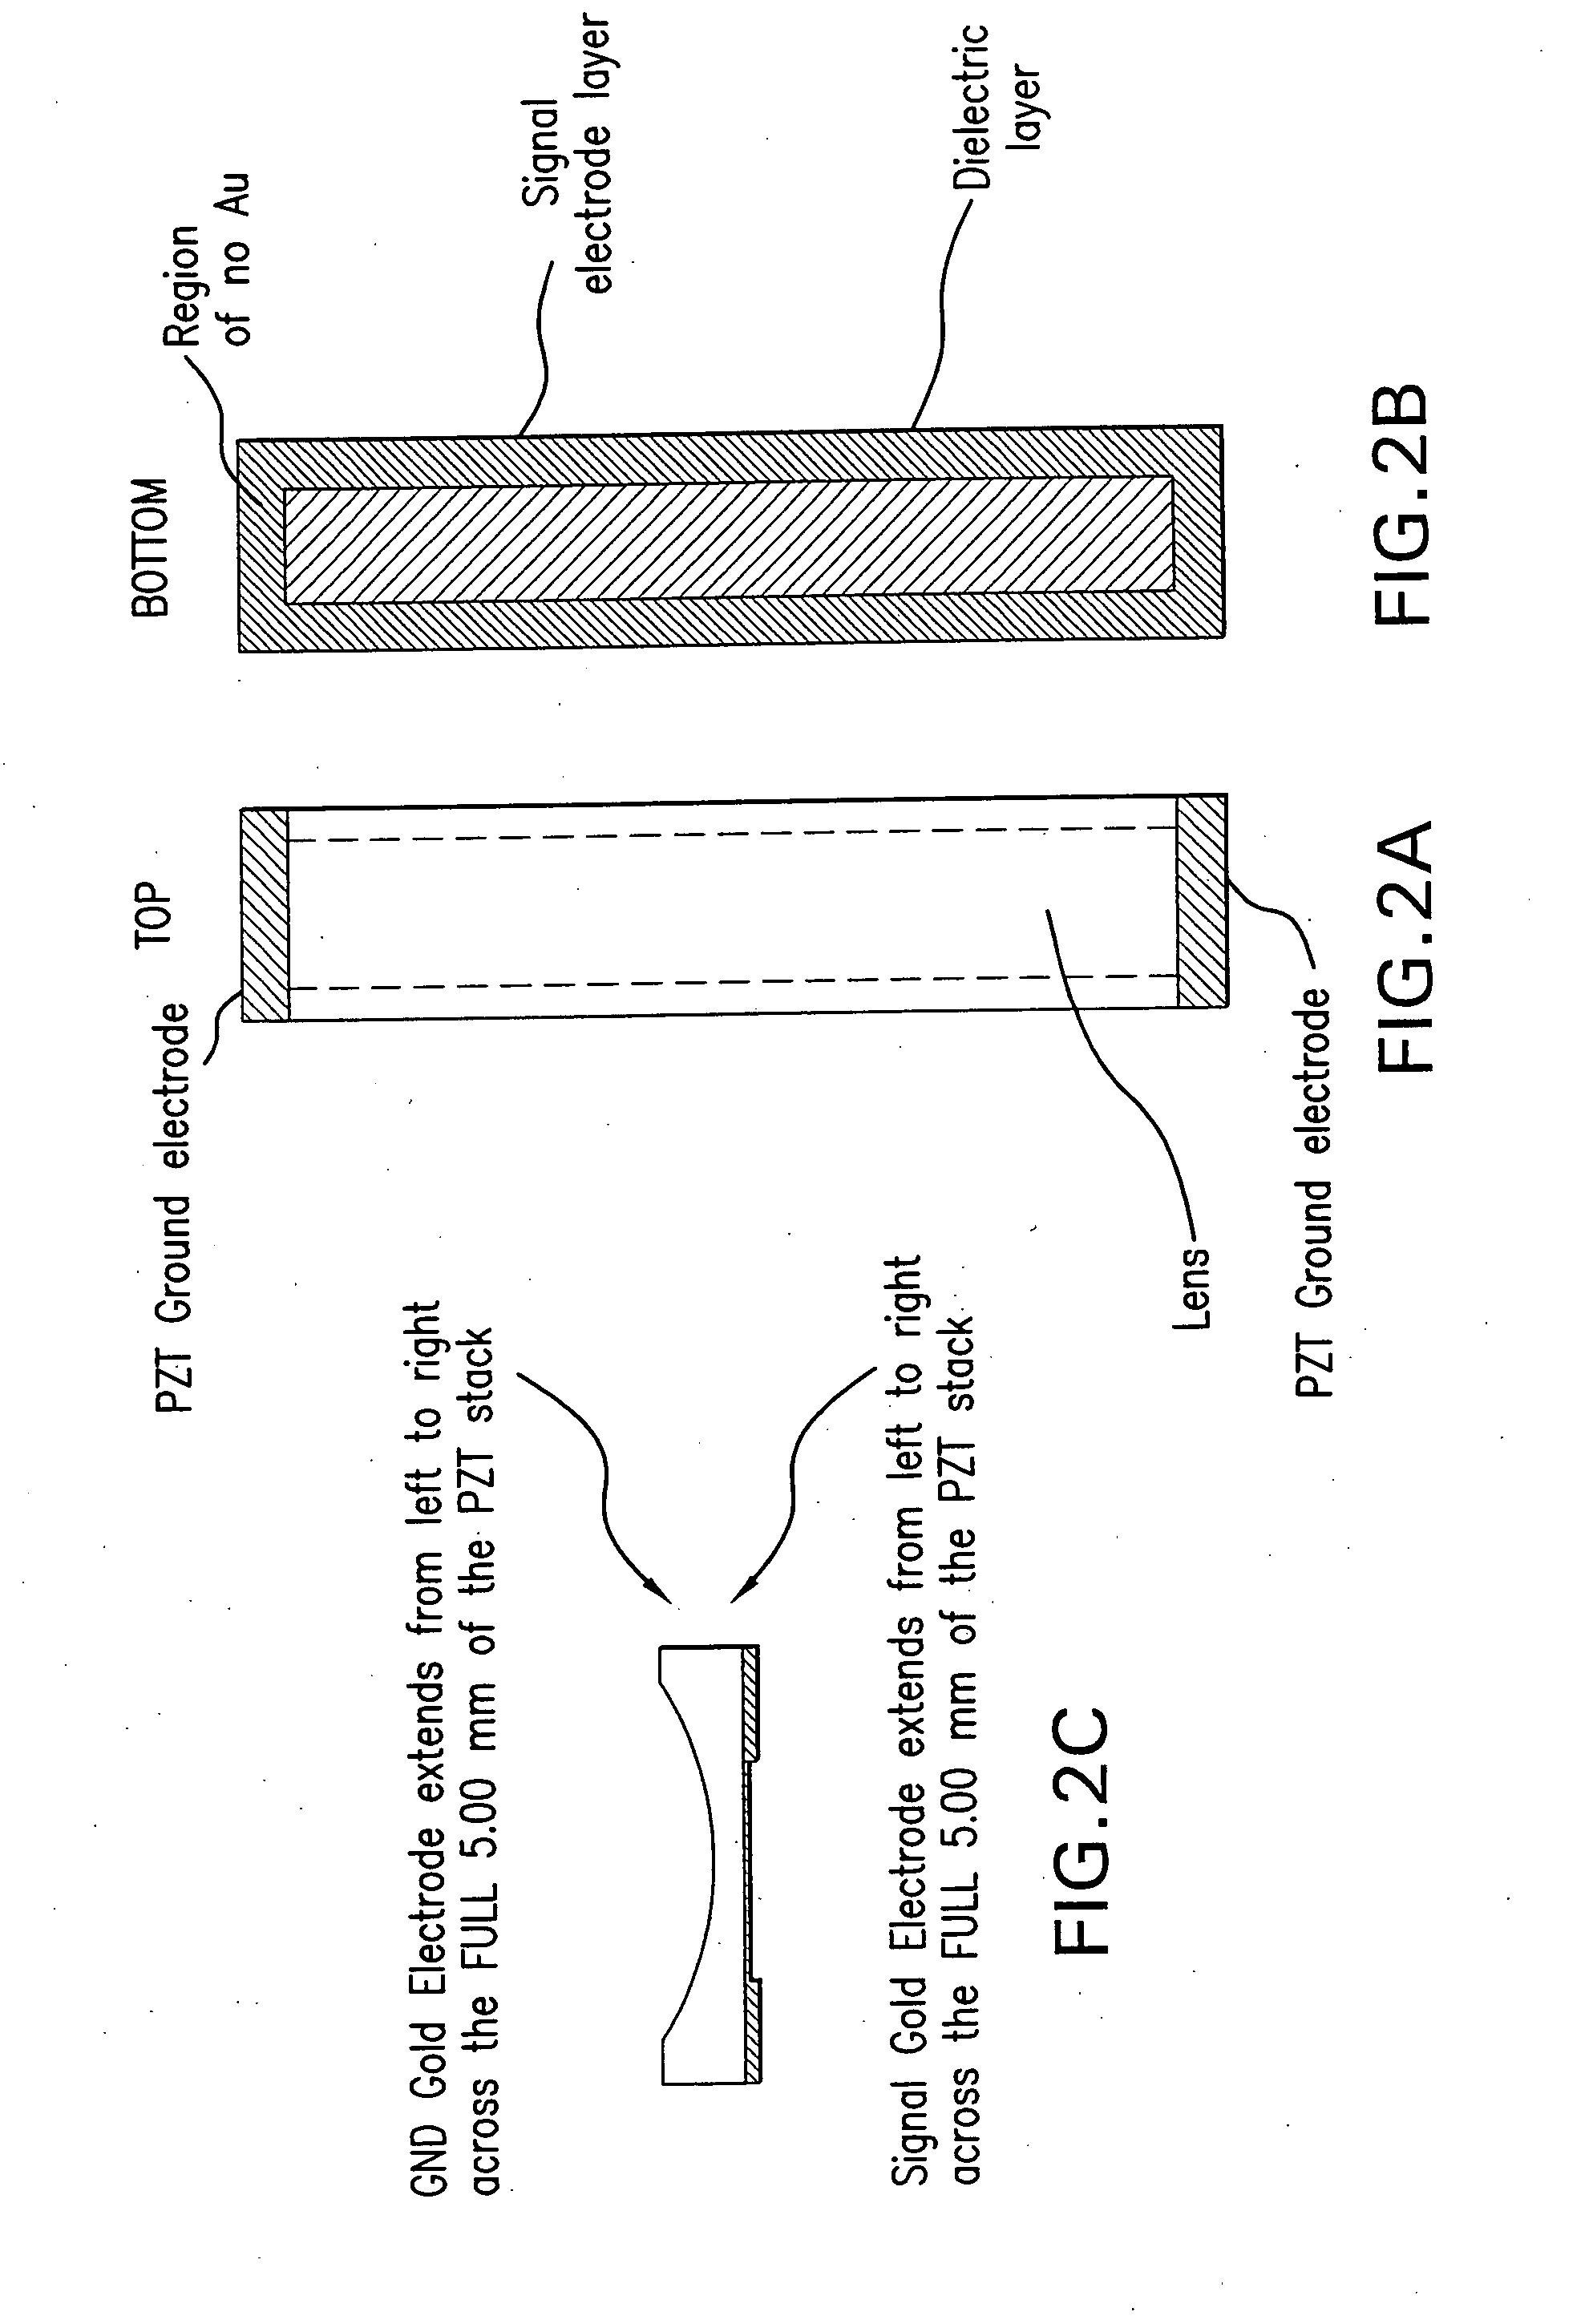 High frequency array ultrasound system